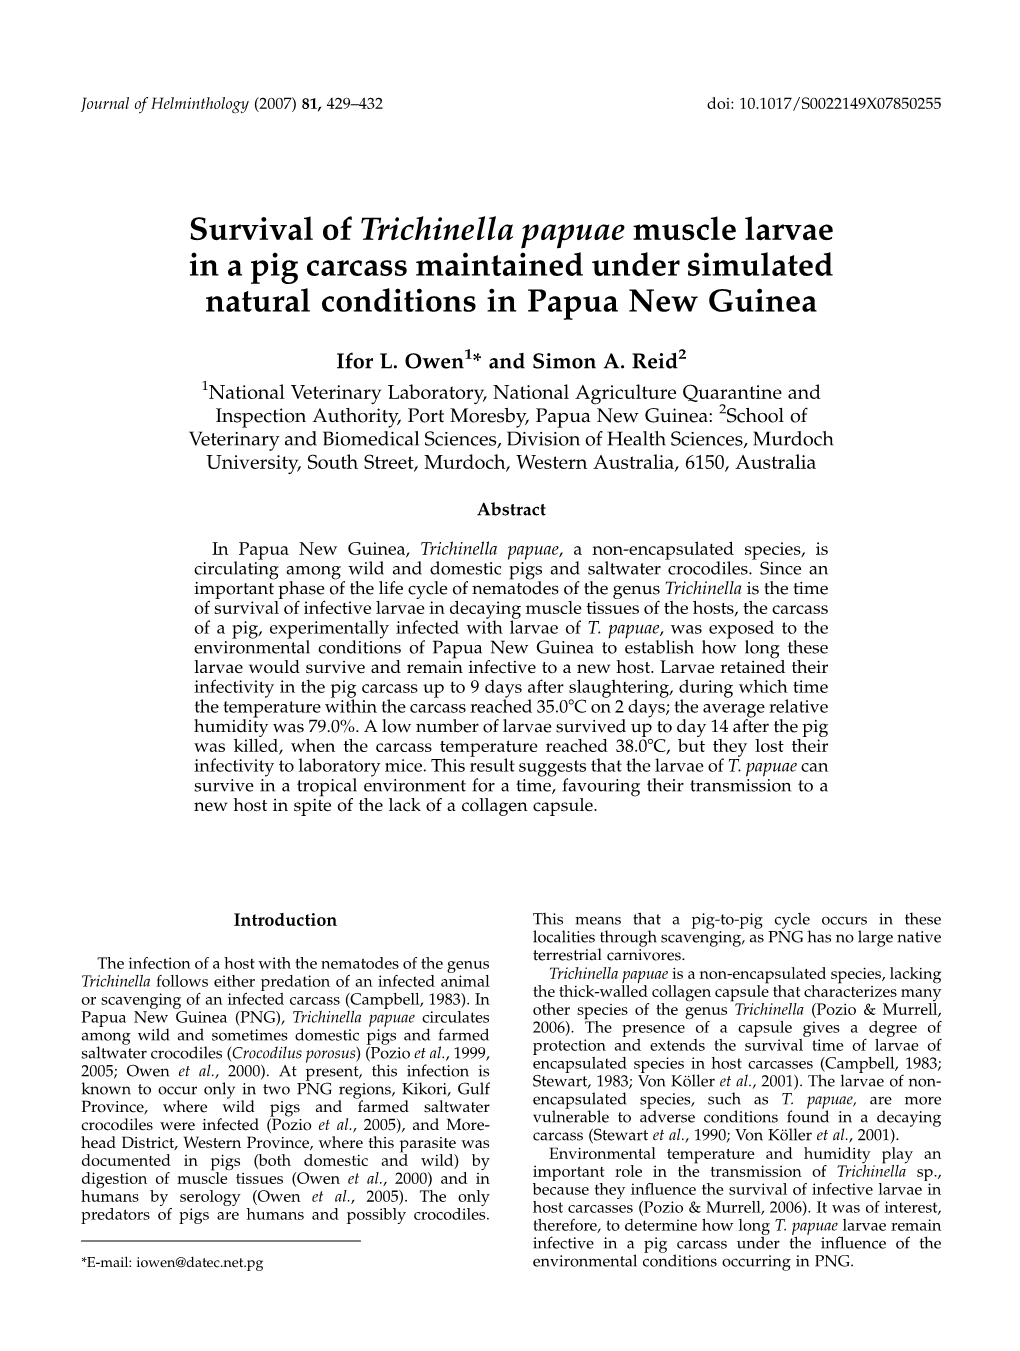 Survival of Trichinella Papuae Muscle Larvae in a Pig Carcass Maintained Under Simulated Natural Conditions in Papua New Guinea